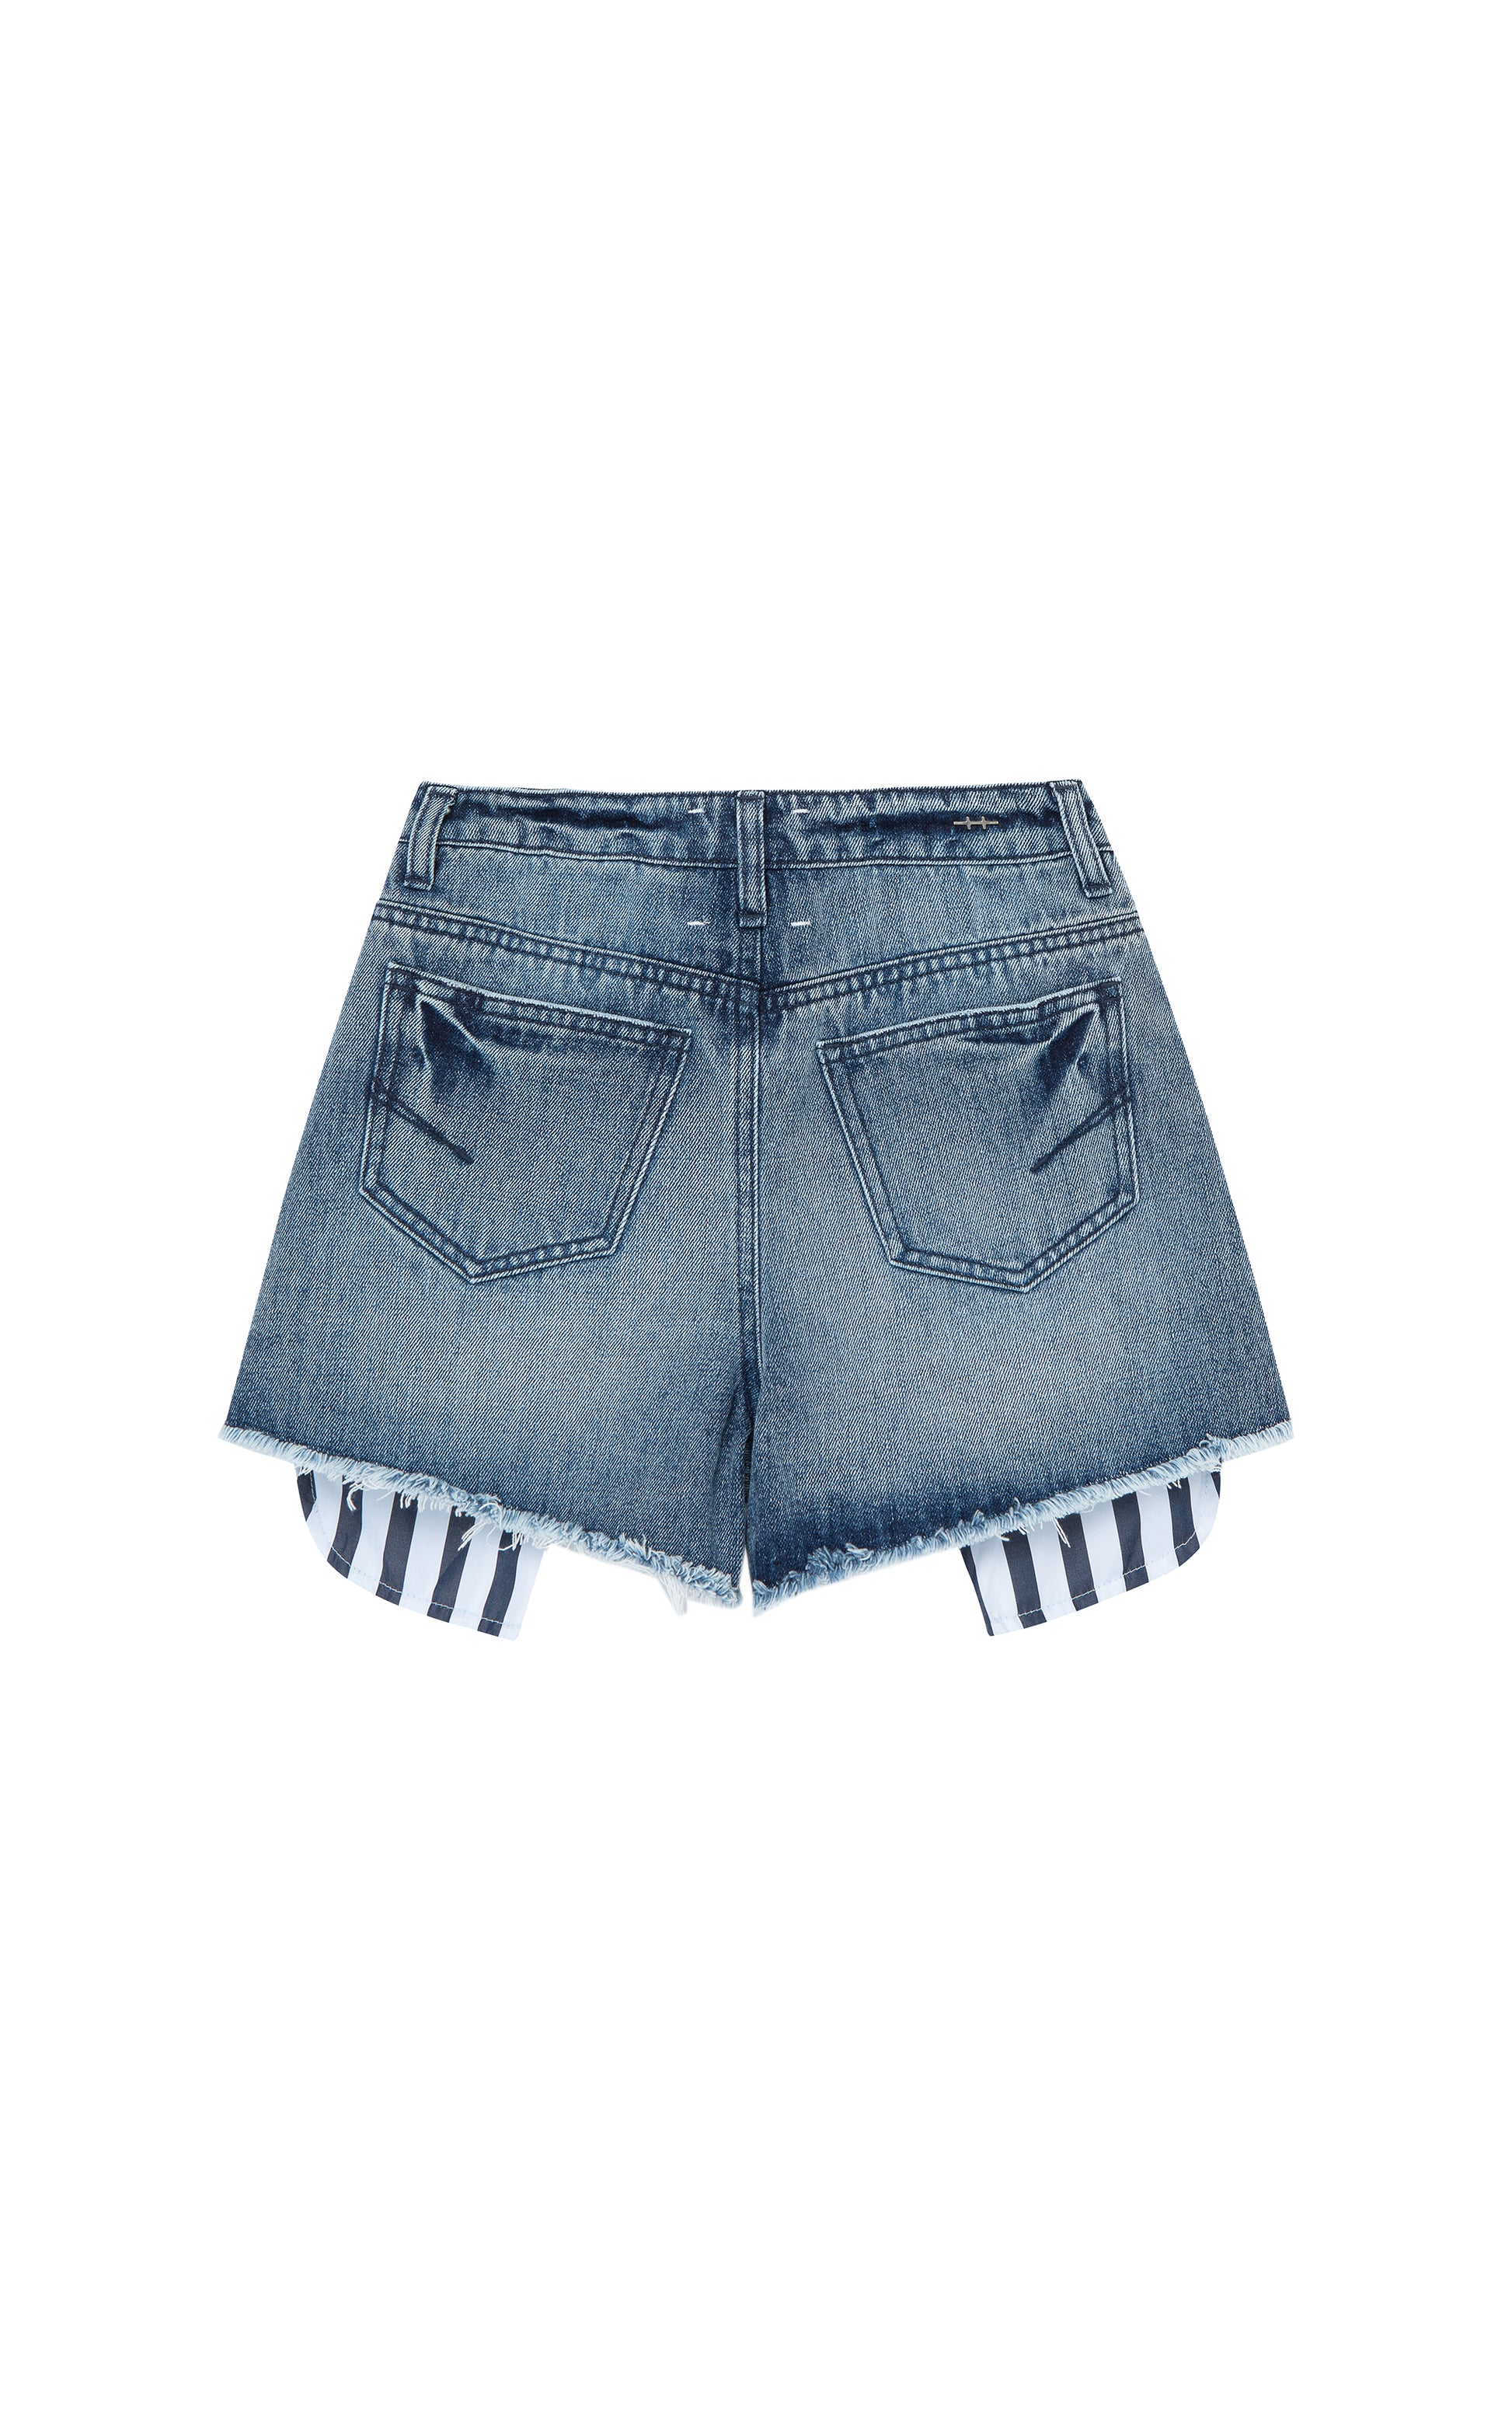 Back of denim shorts with blue-and-white striped exposed pockets